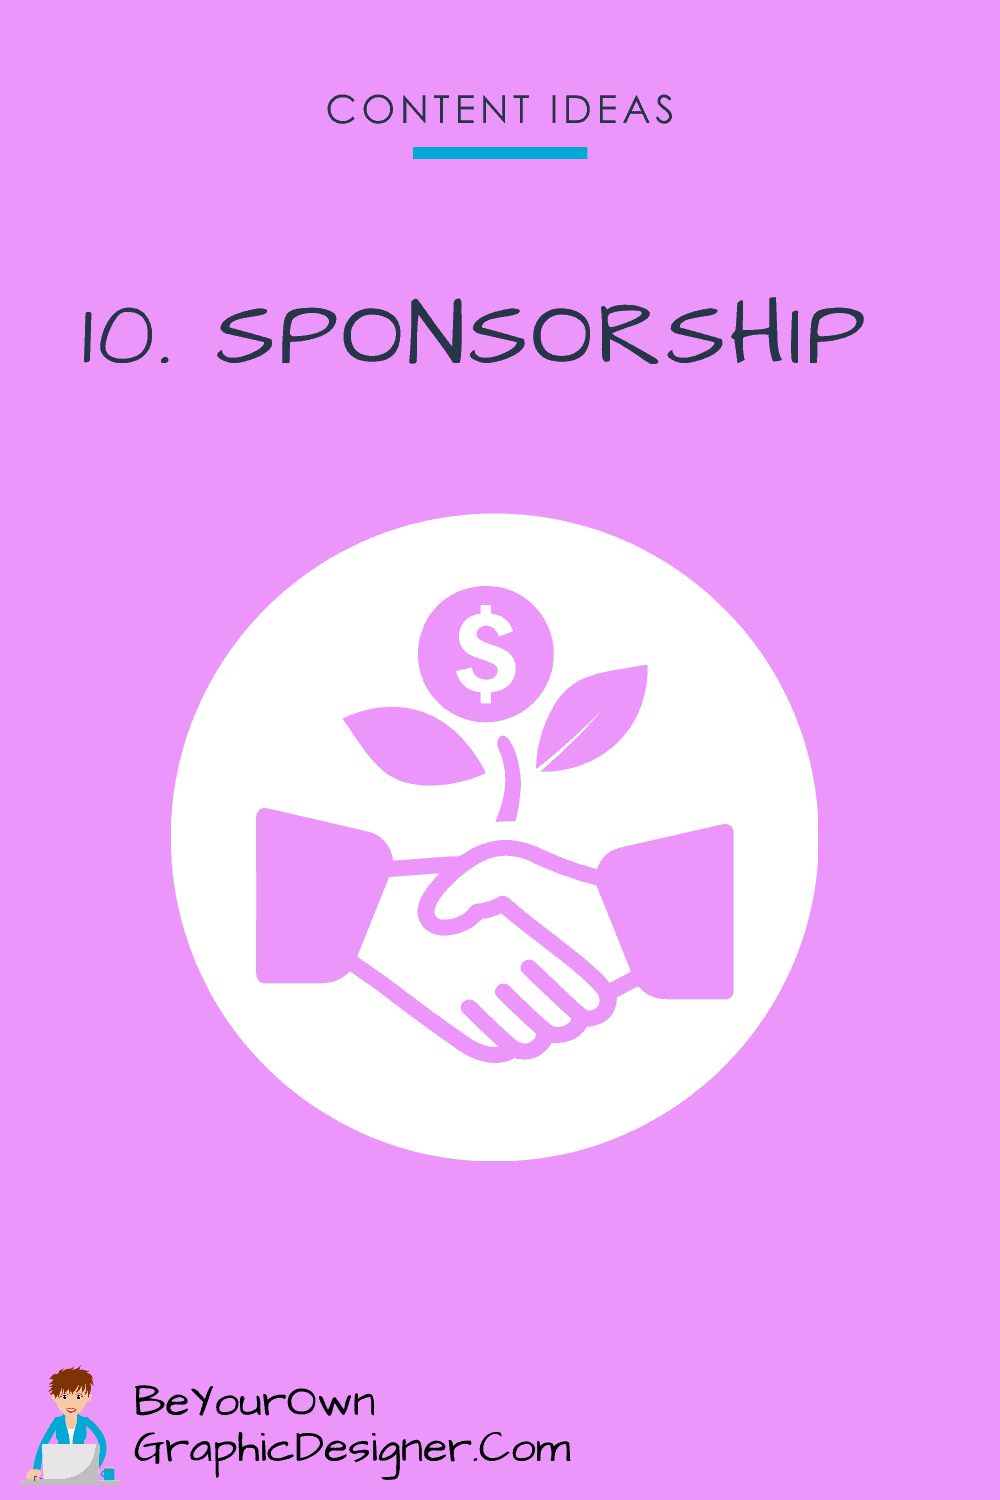 Sponsorship- 100+ Content Ideas and Inspiration for August 2022